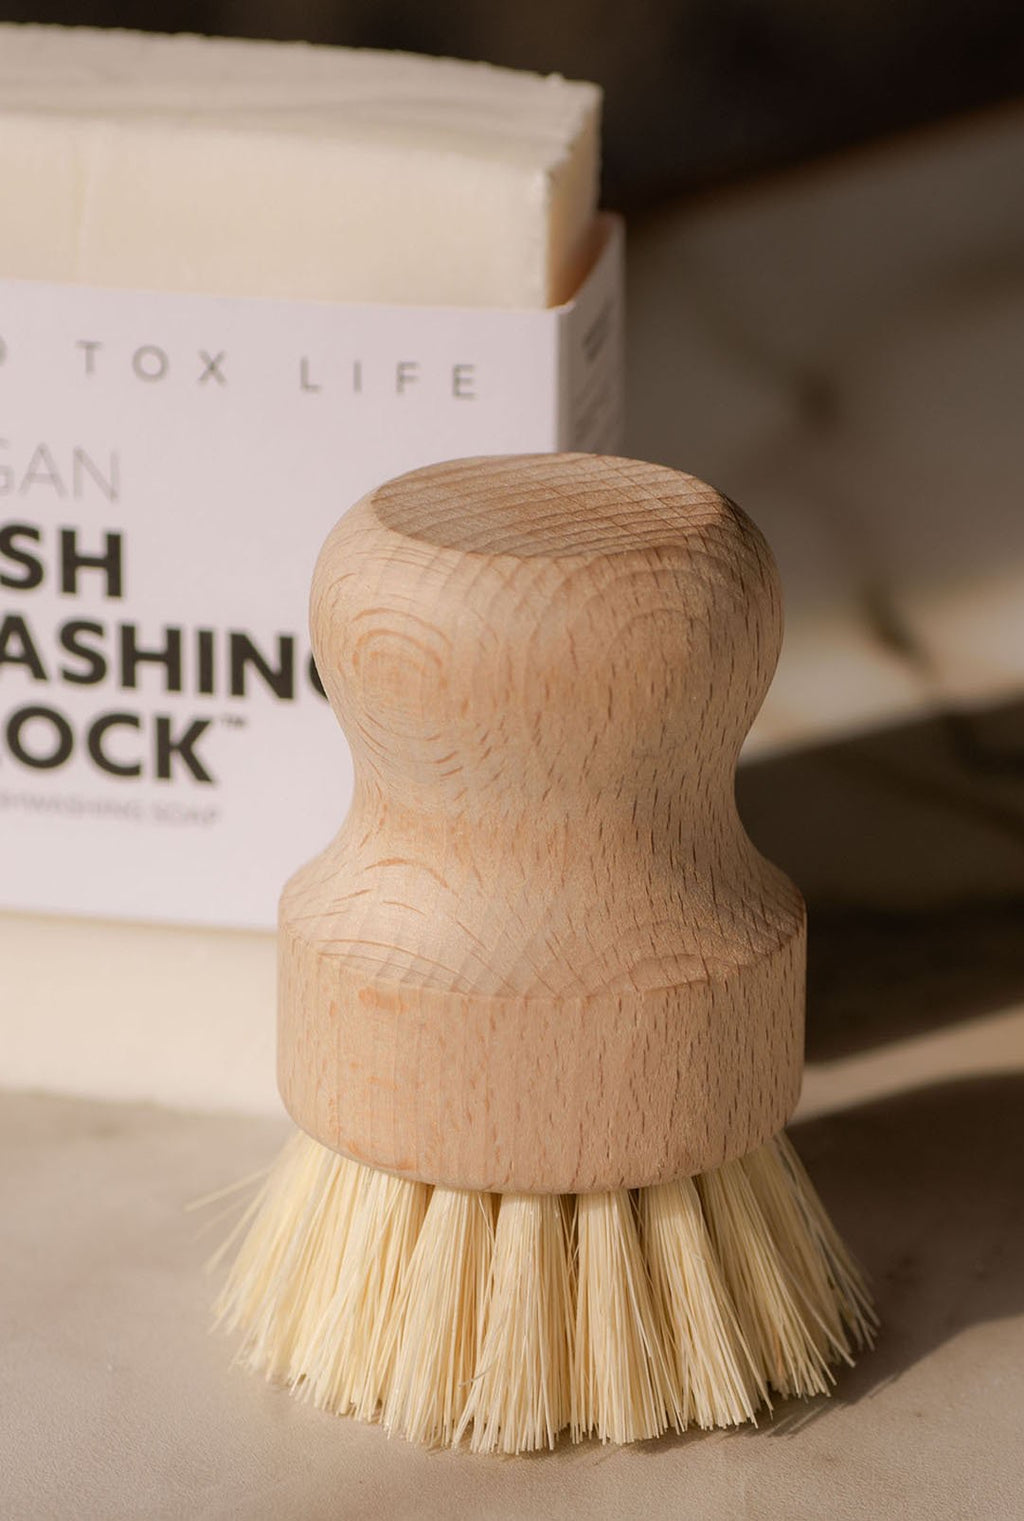 Dish and Pot brush scrubber